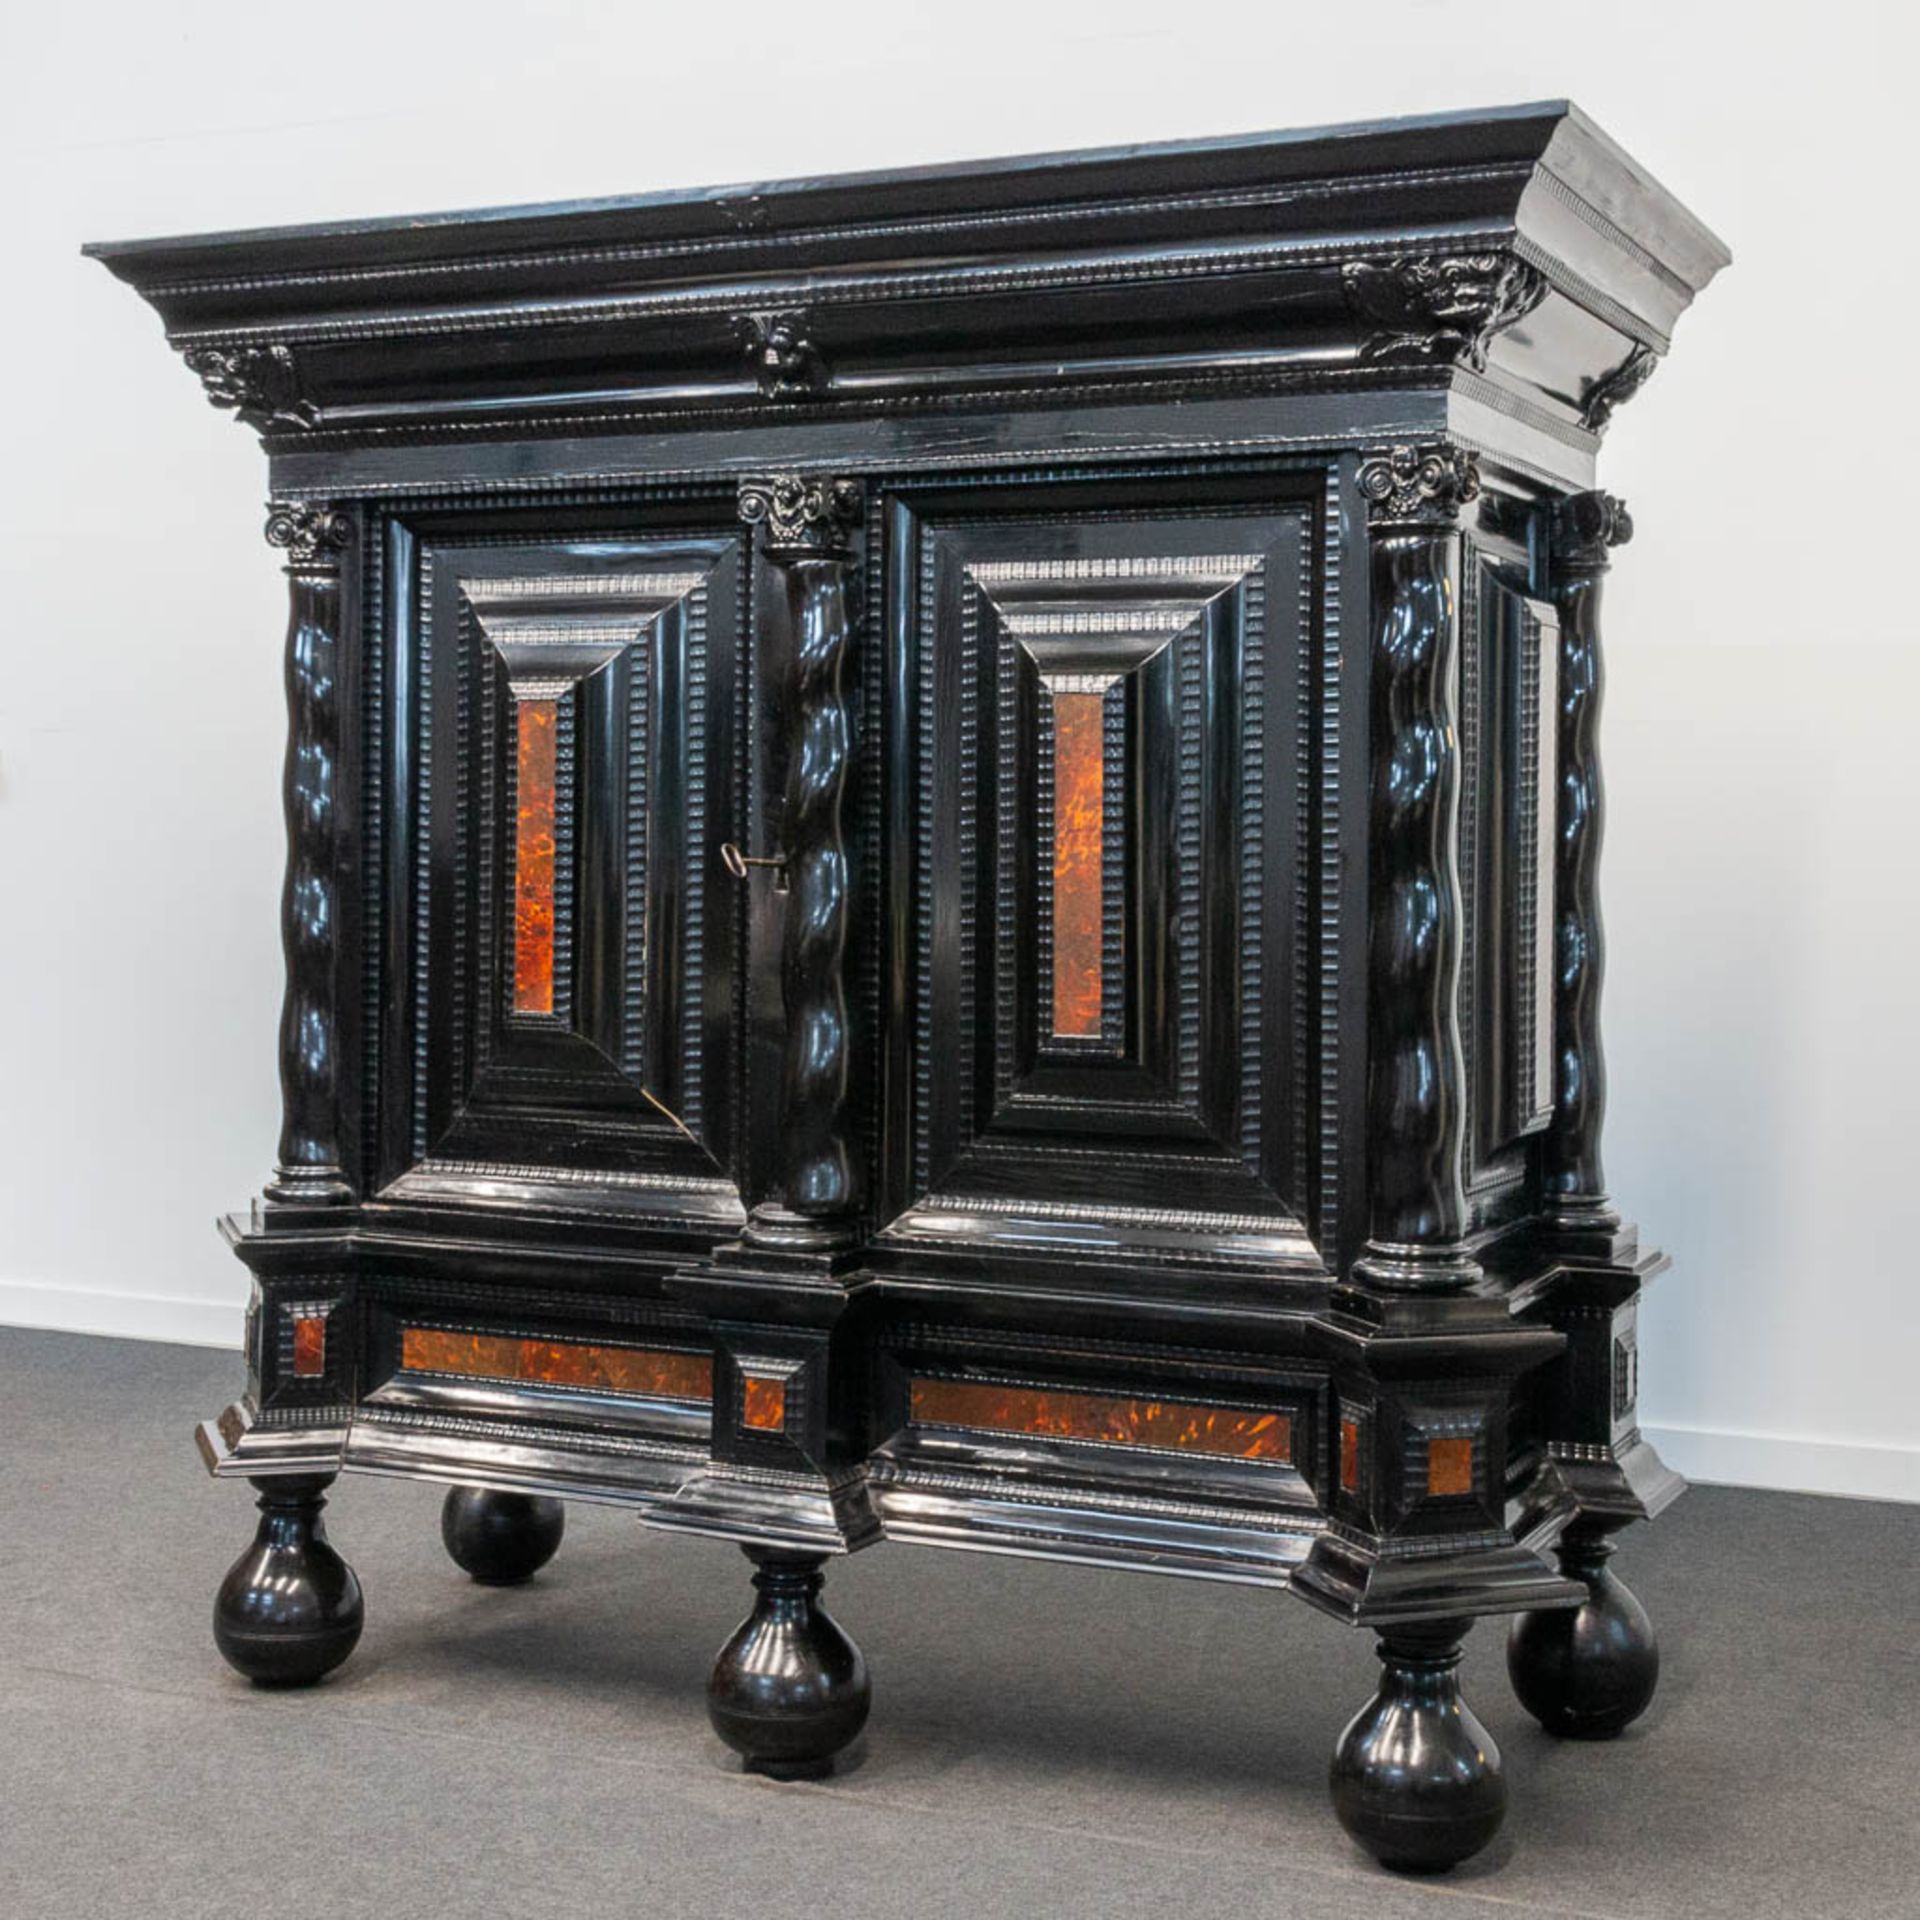 An exceptional Dutch pillow cabinet, ebony veneer, inlaid with tortoiseshell. The second half of the - Image 5 of 10